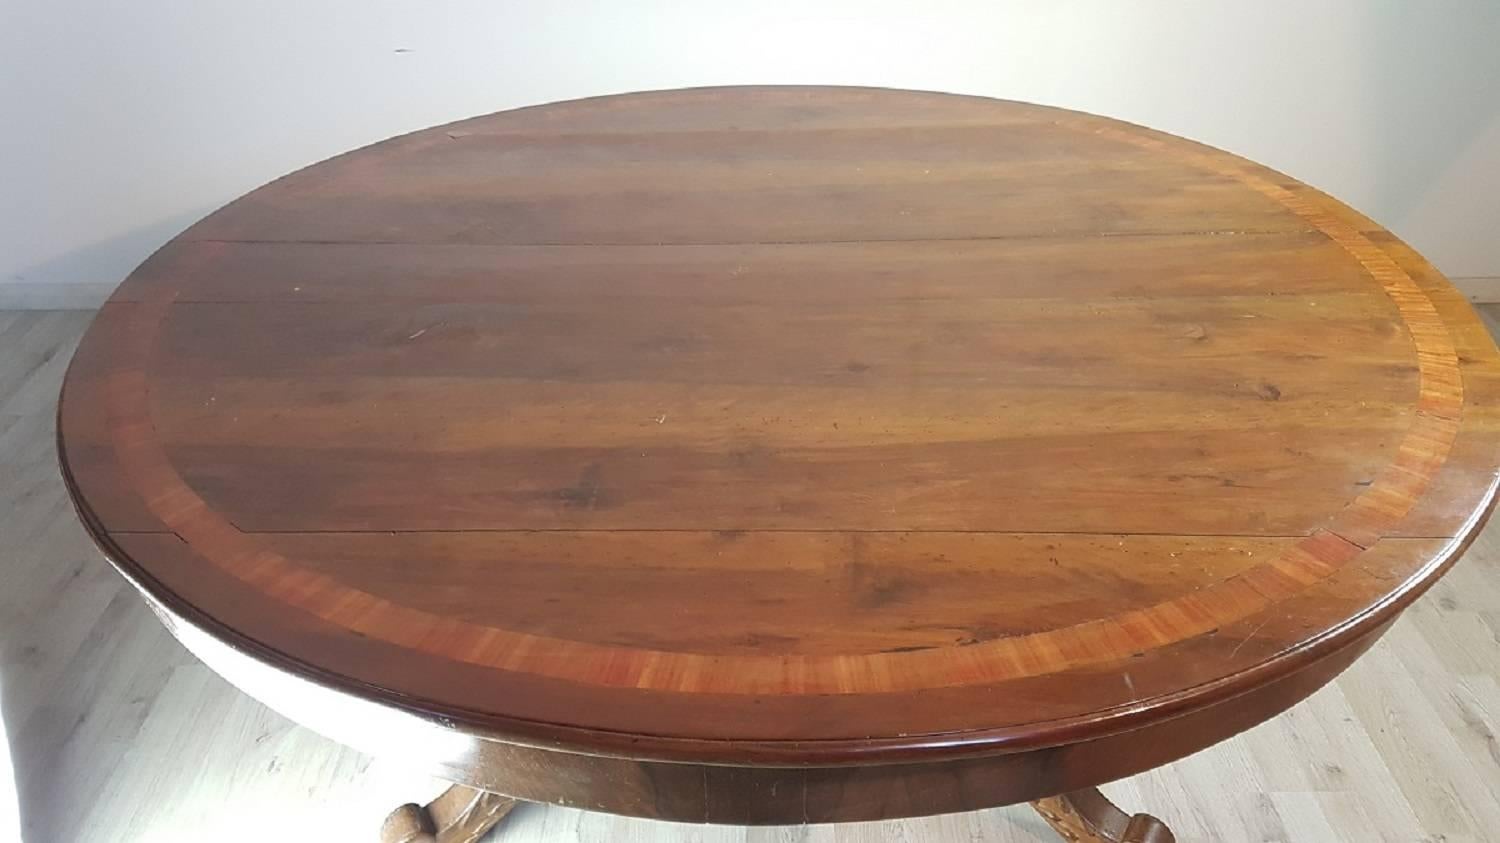 Round table not extensible large with elegant central column full period Charles X 1824-1830, 19th century from the quality possible only for origin from workshops of great cabinet-making. The table is made of solid walnut, the top presents a